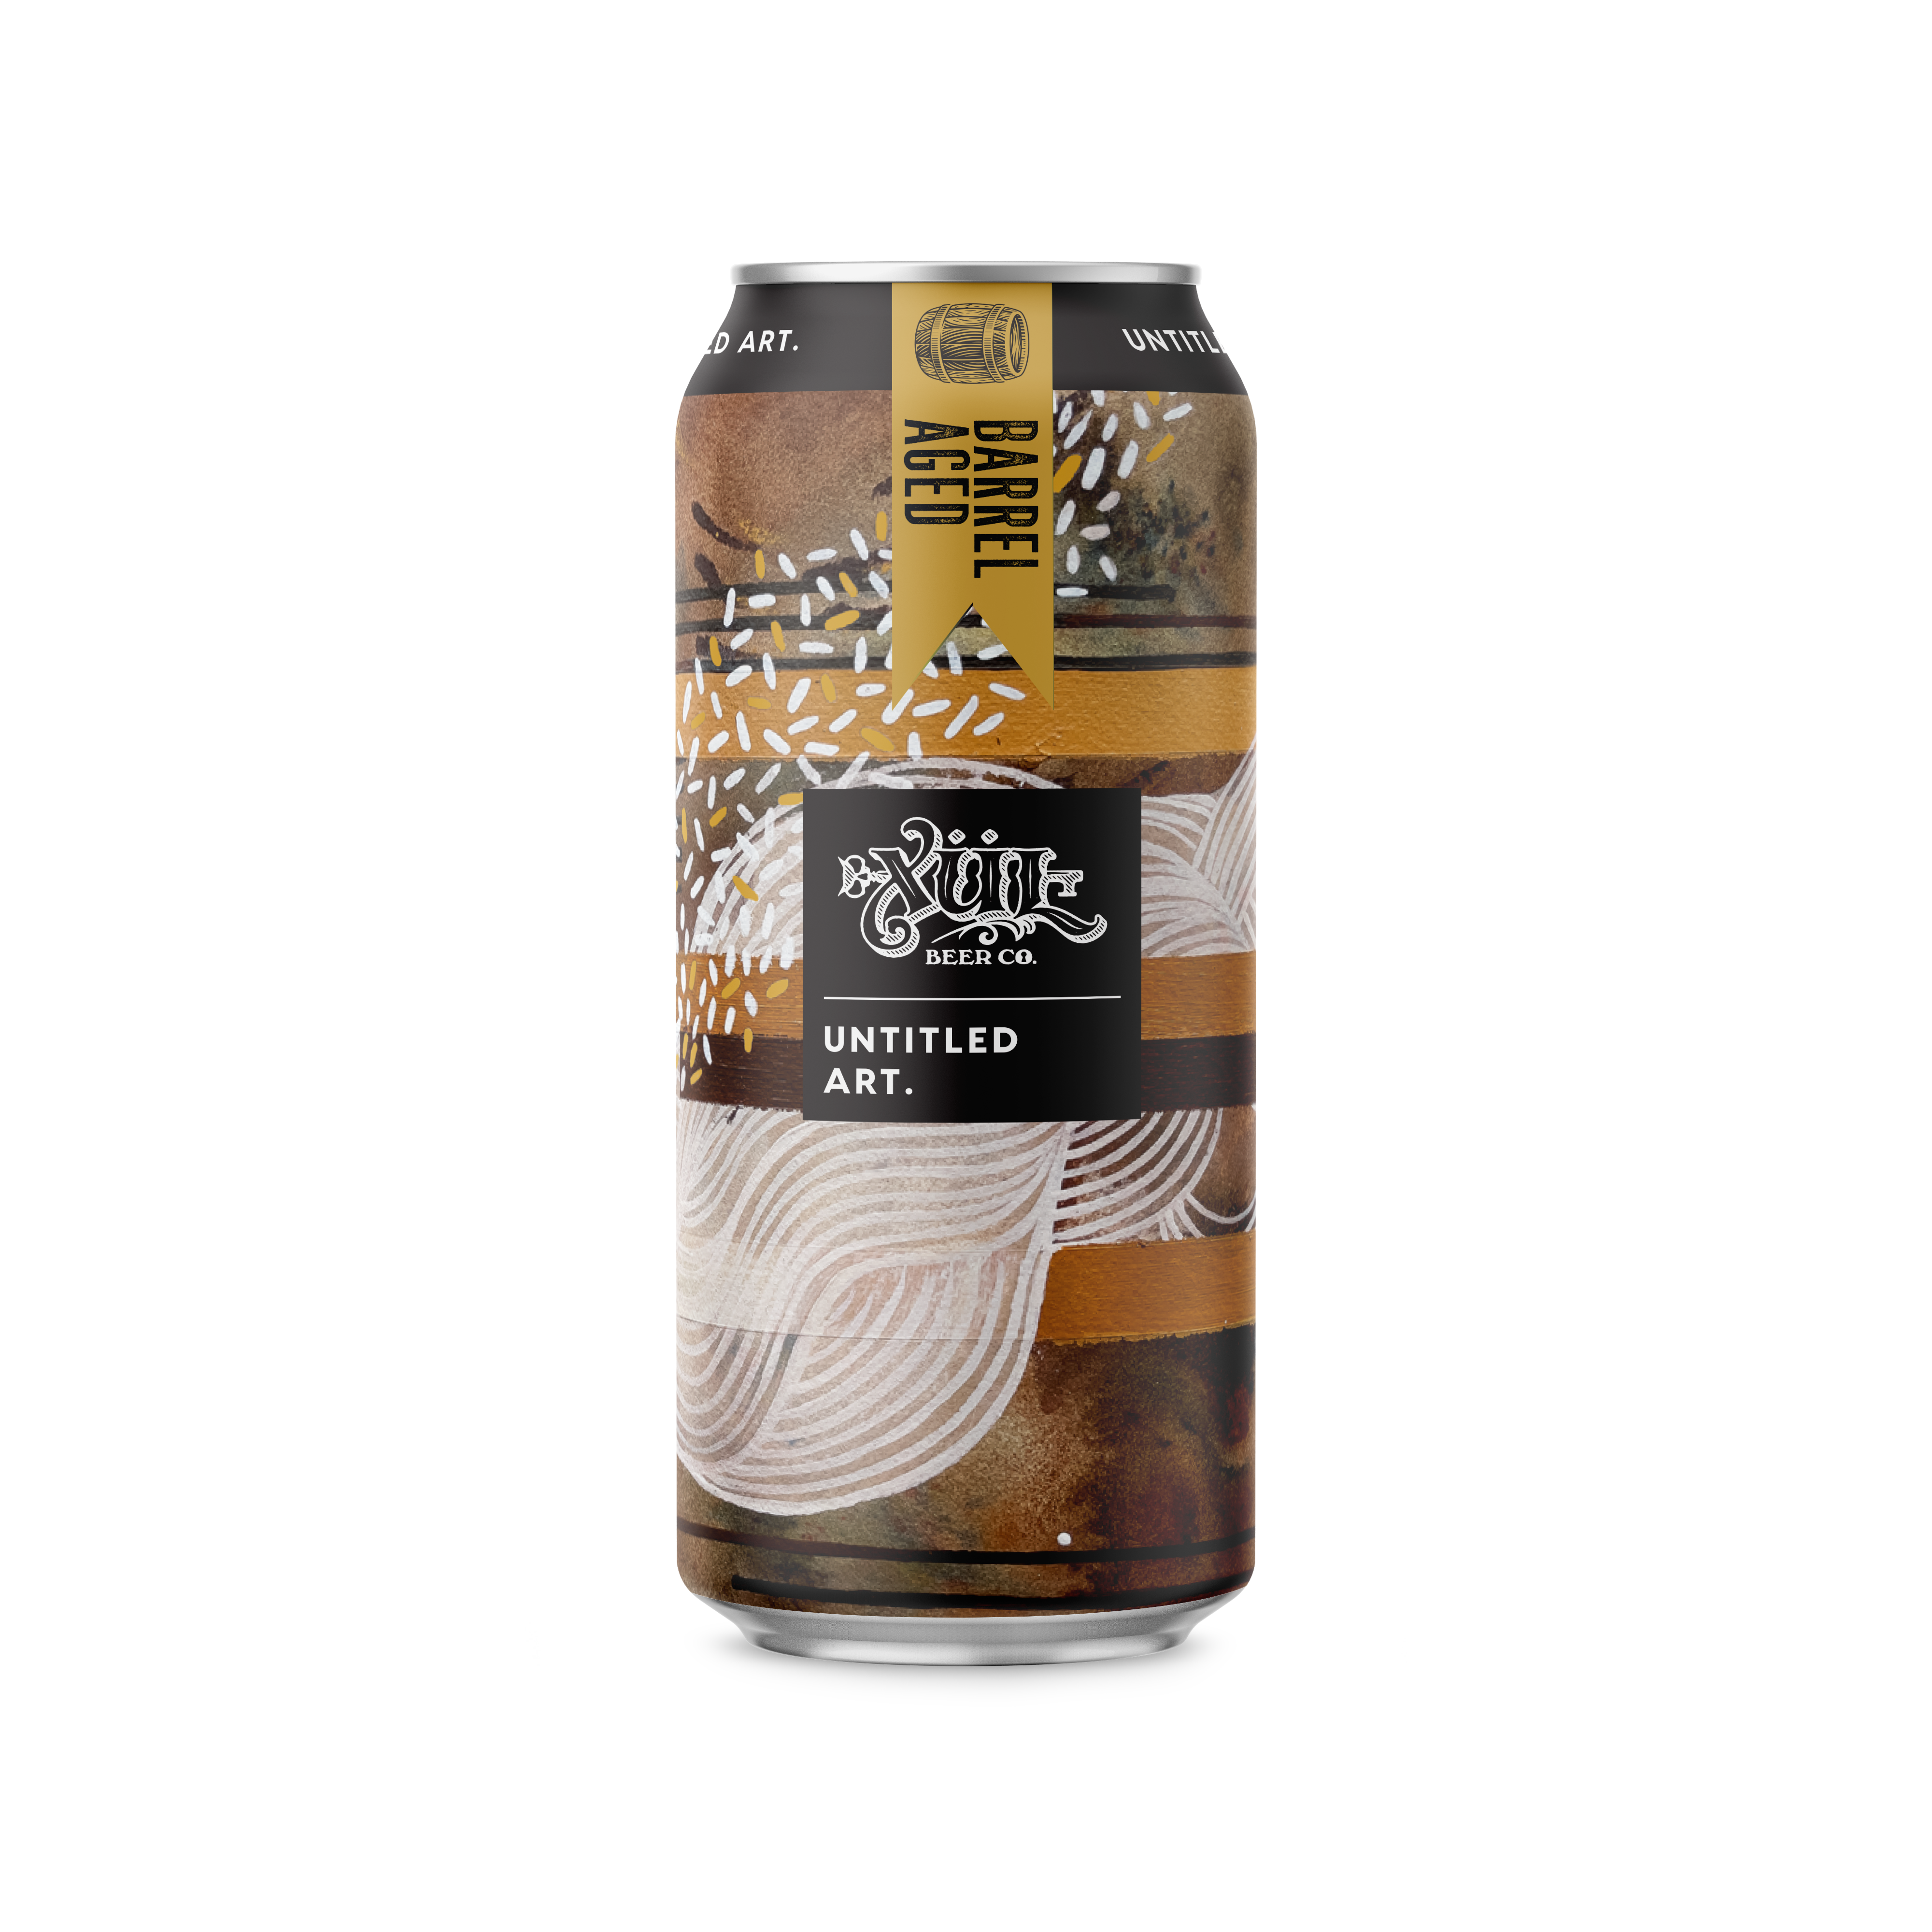 Barrel-Aged German Chocolate Cake Pastry Stout can.